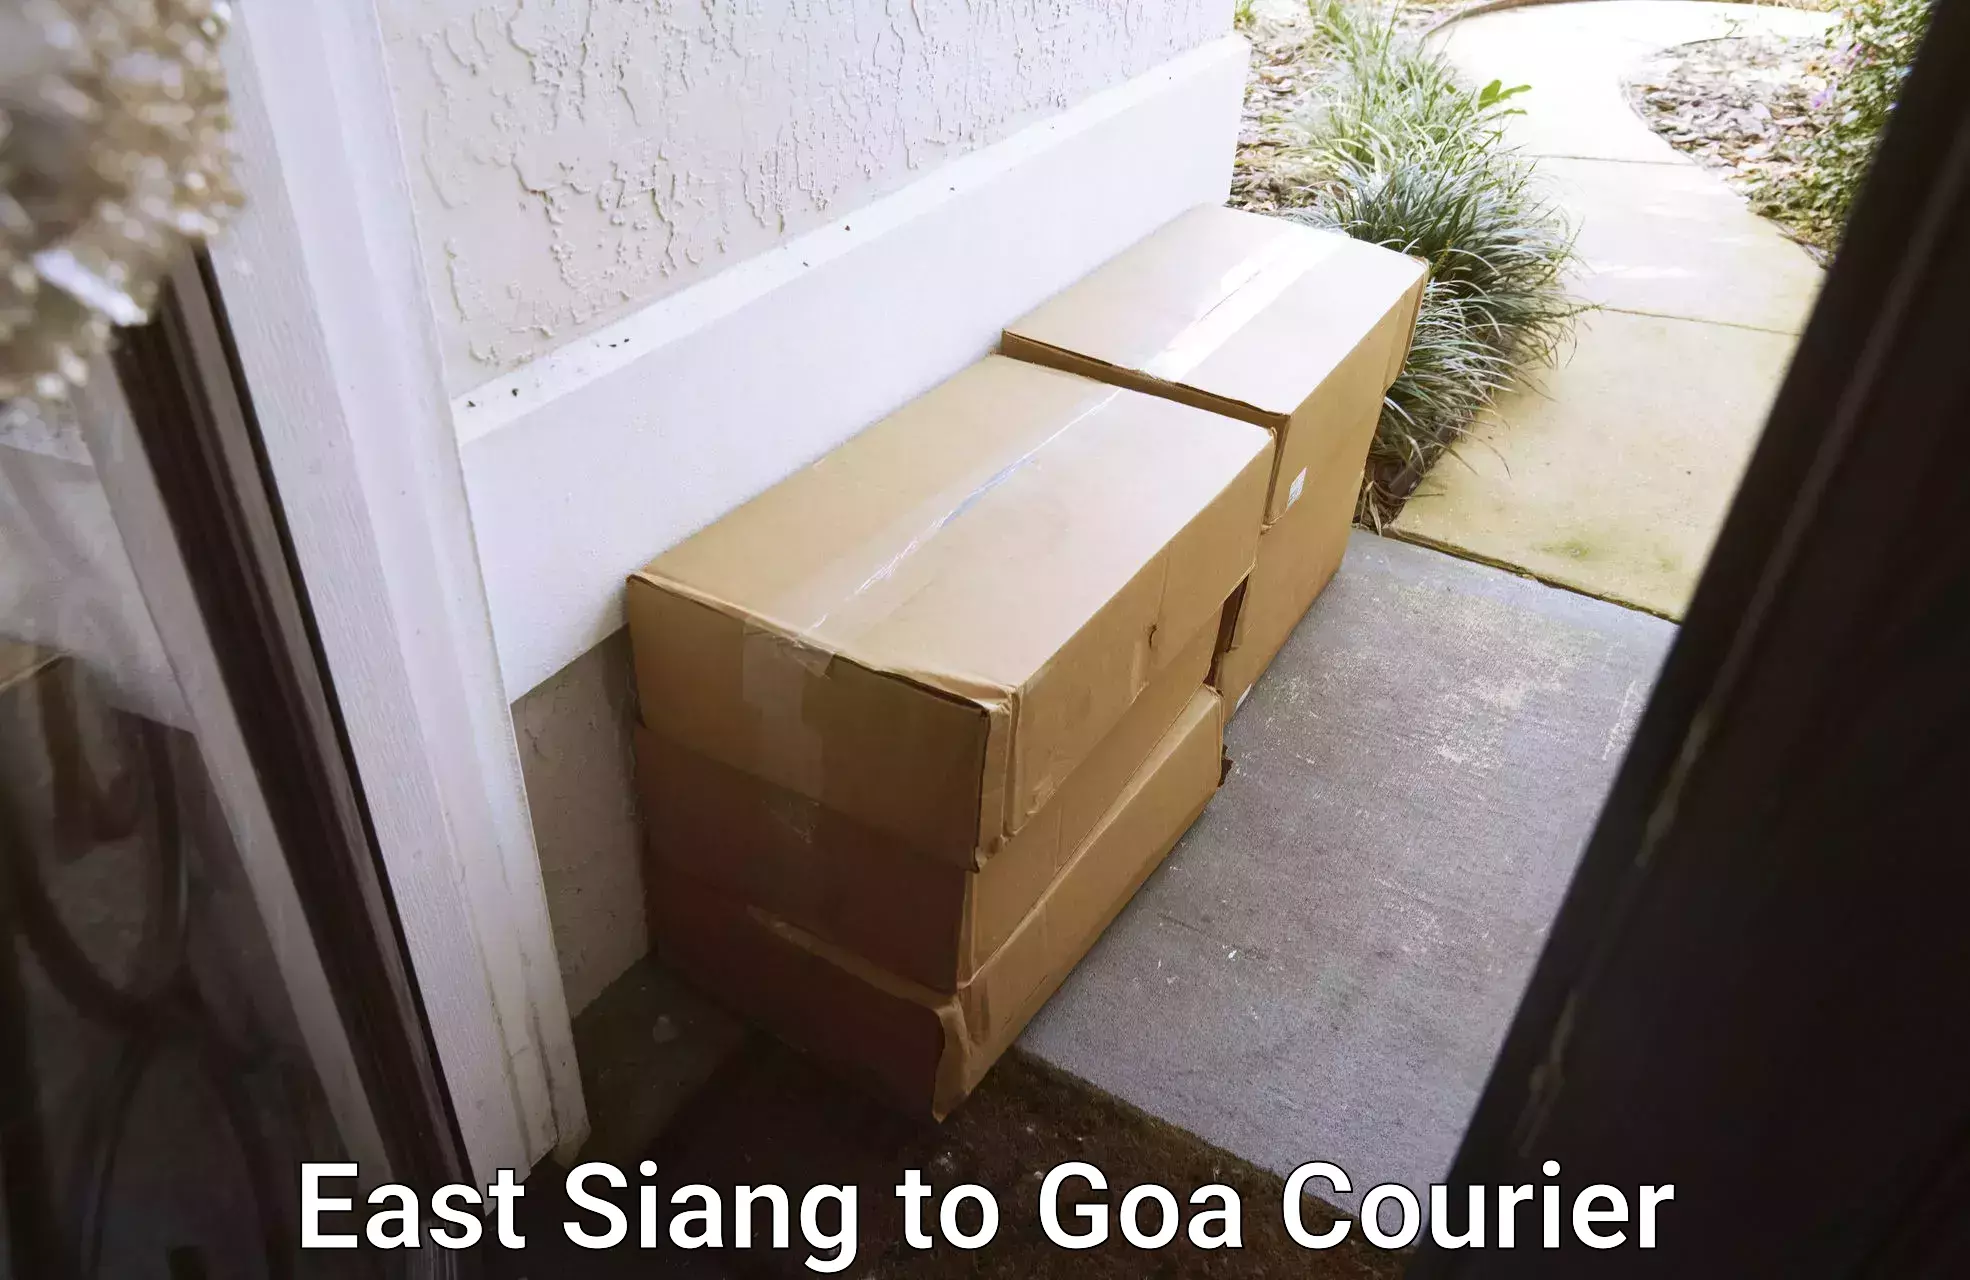 Weekend courier service East Siang to Ponda